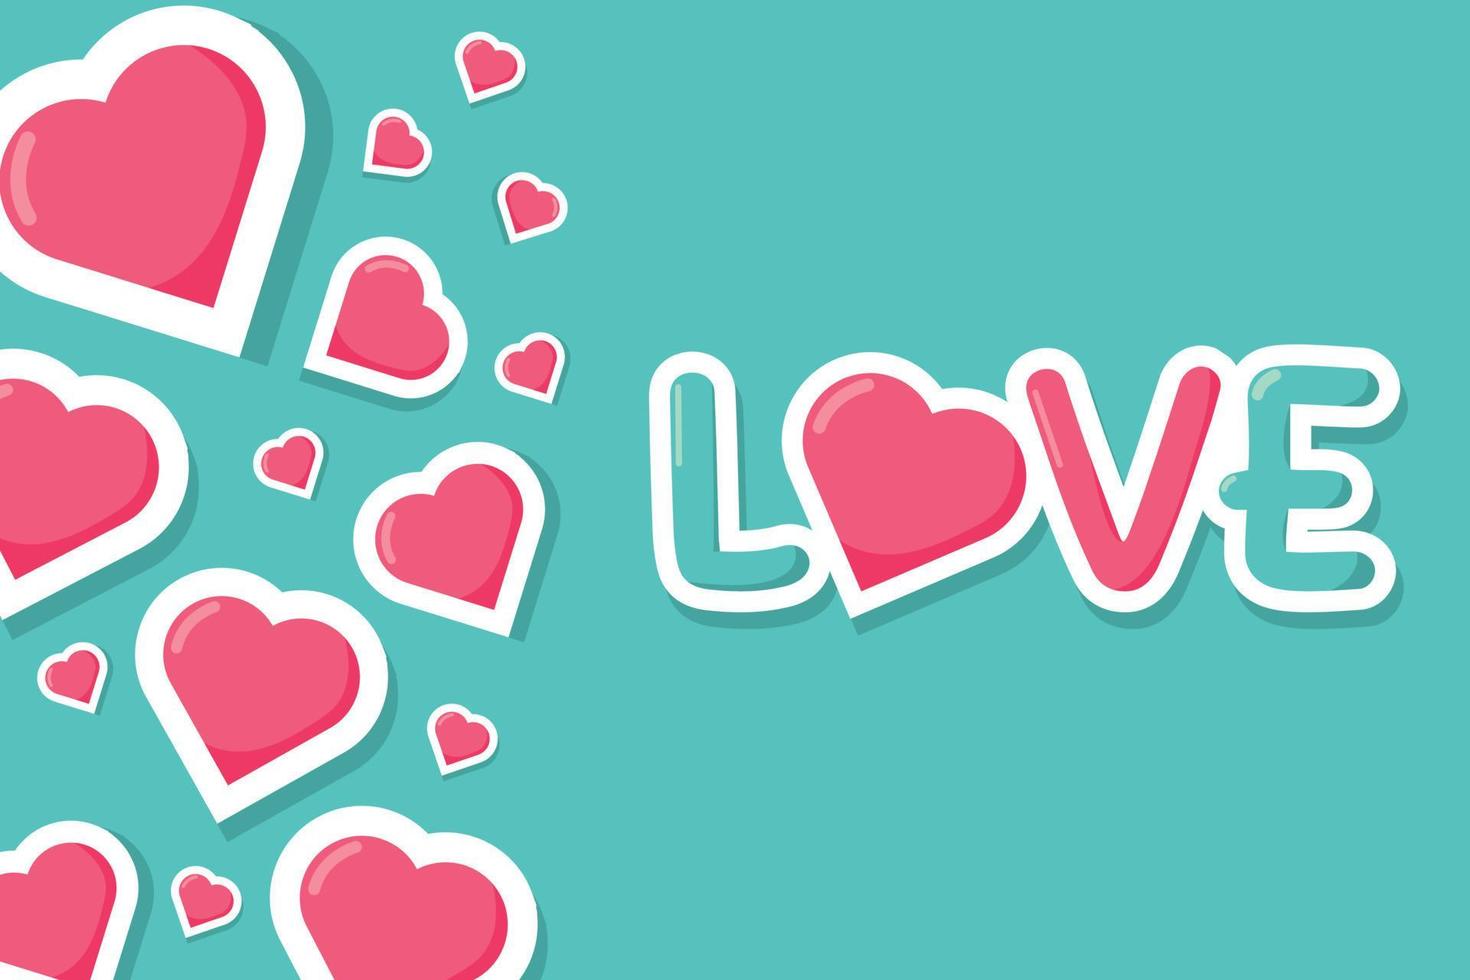 Happy Valentine's day. writing letters love text doodles vector